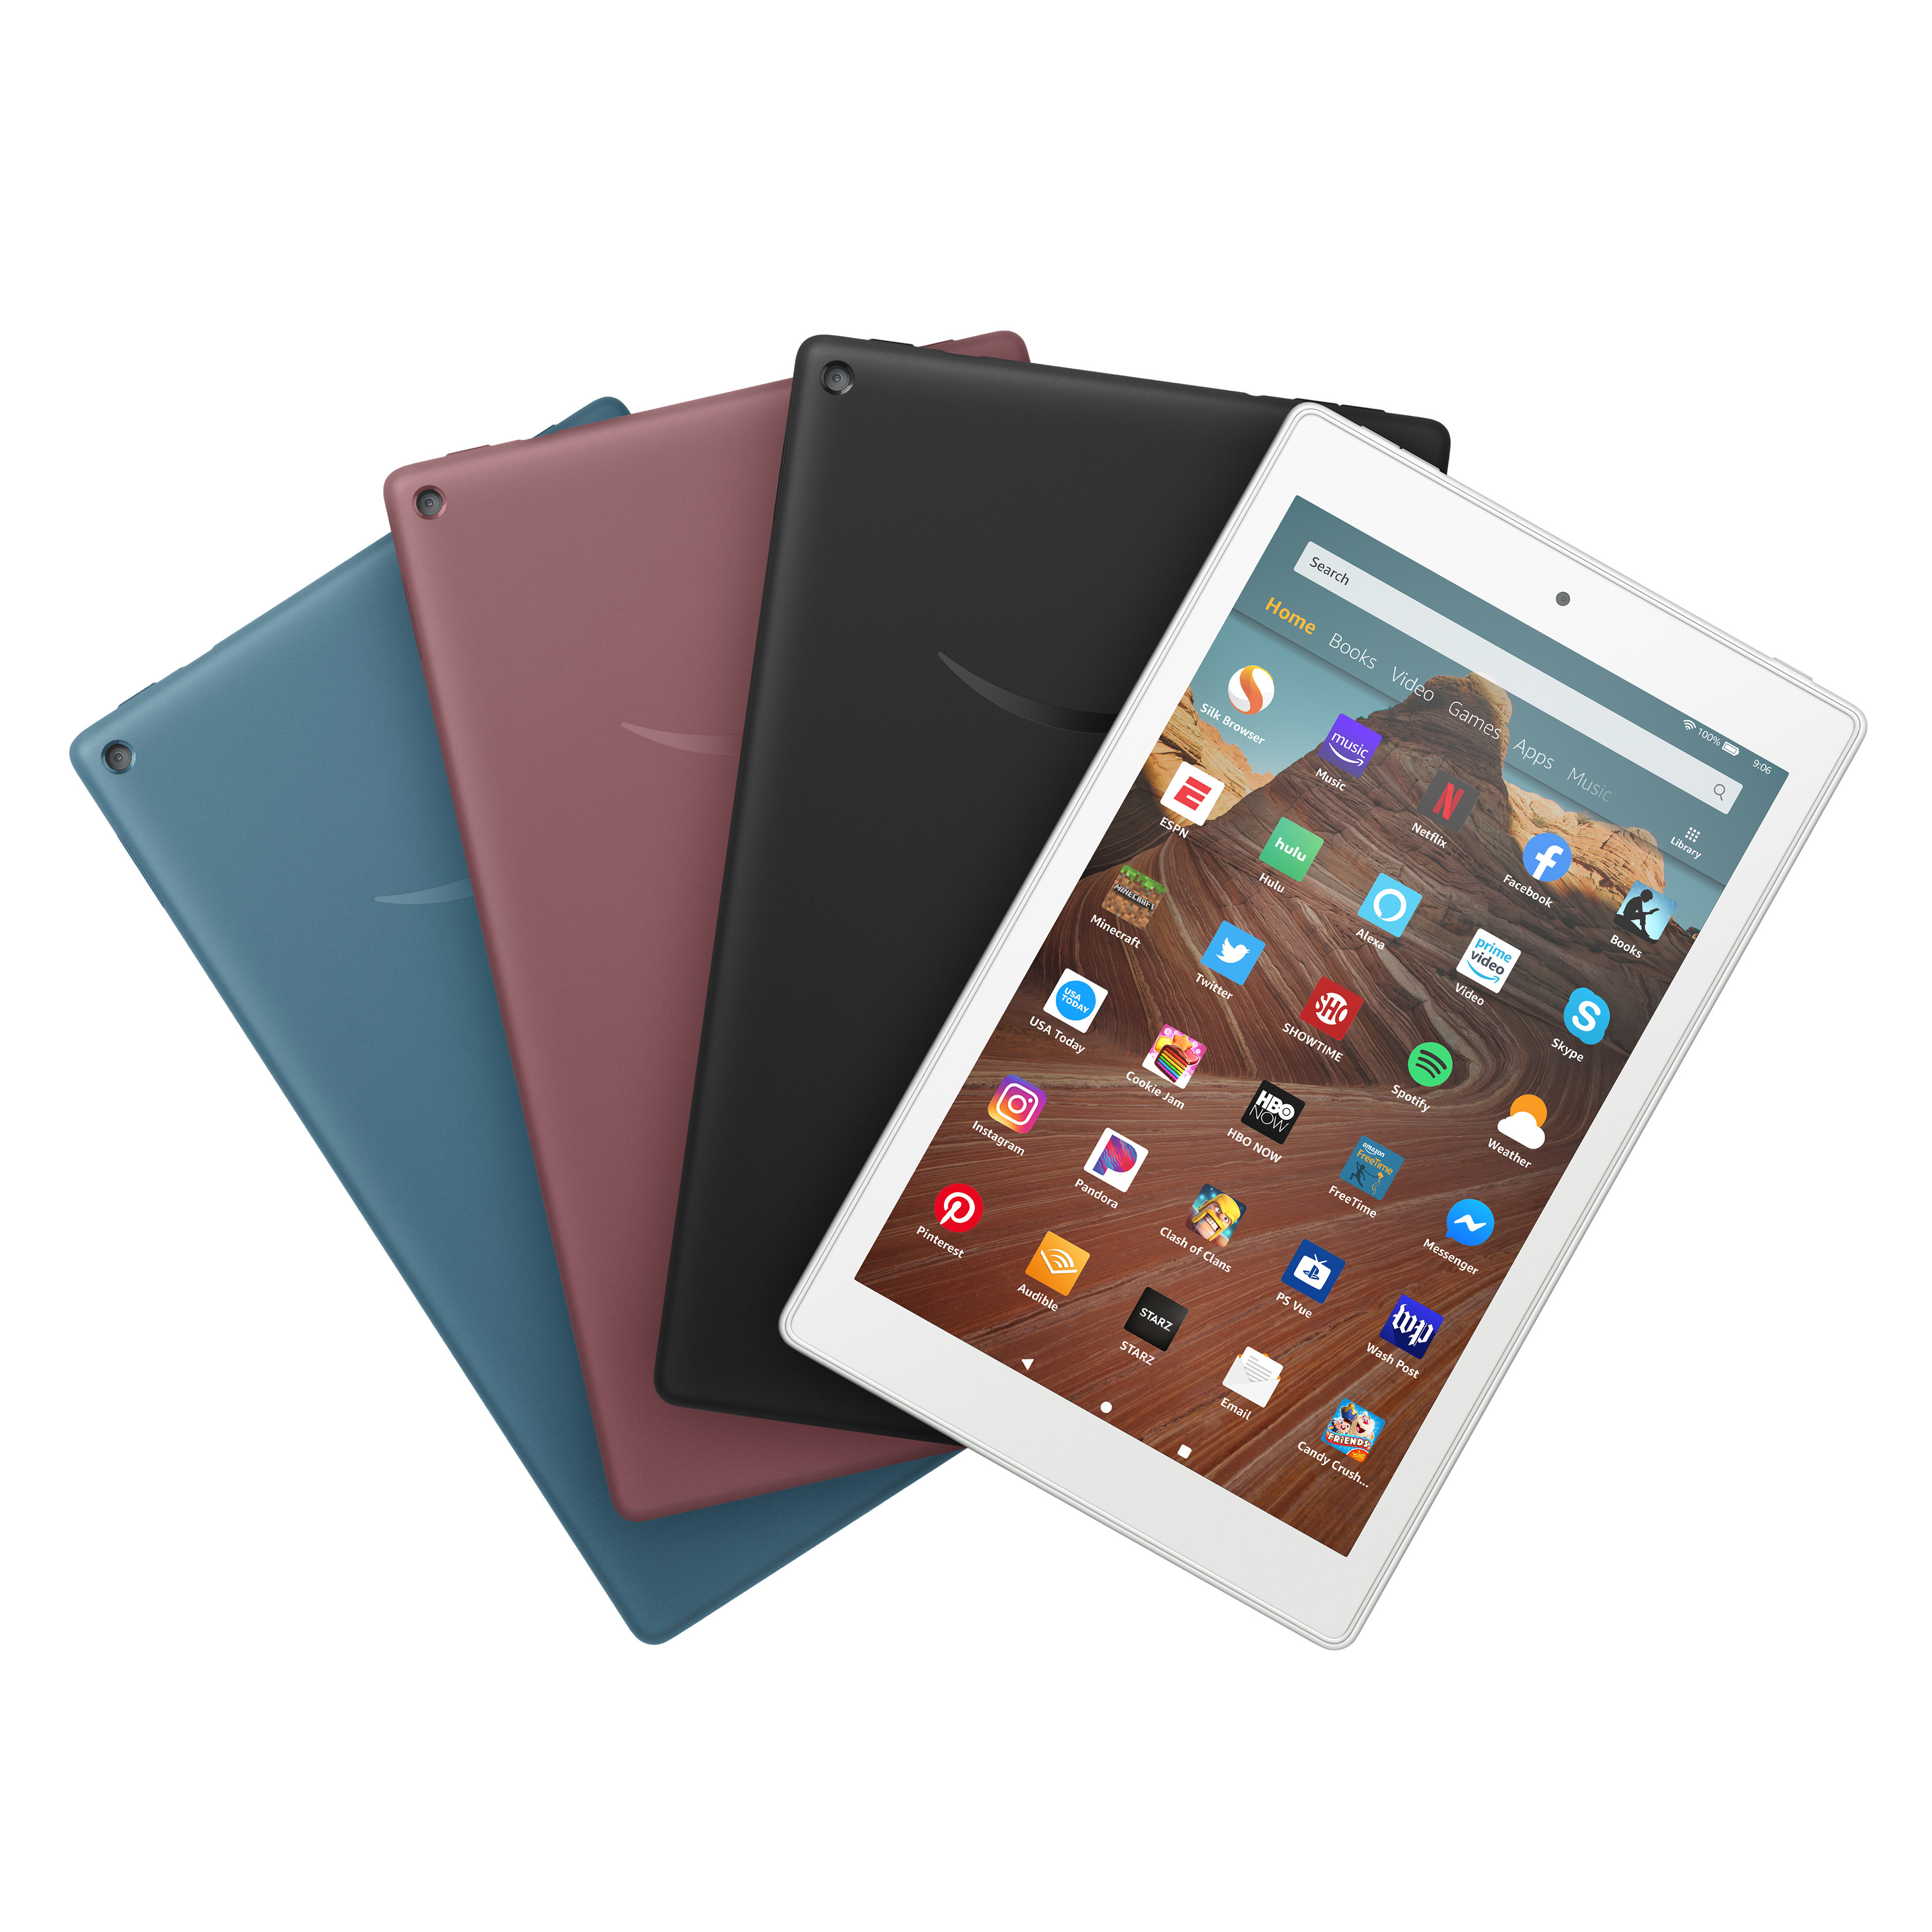 Introducing the All-New Fire HD 10: Brilliant 10.1” Full HD 